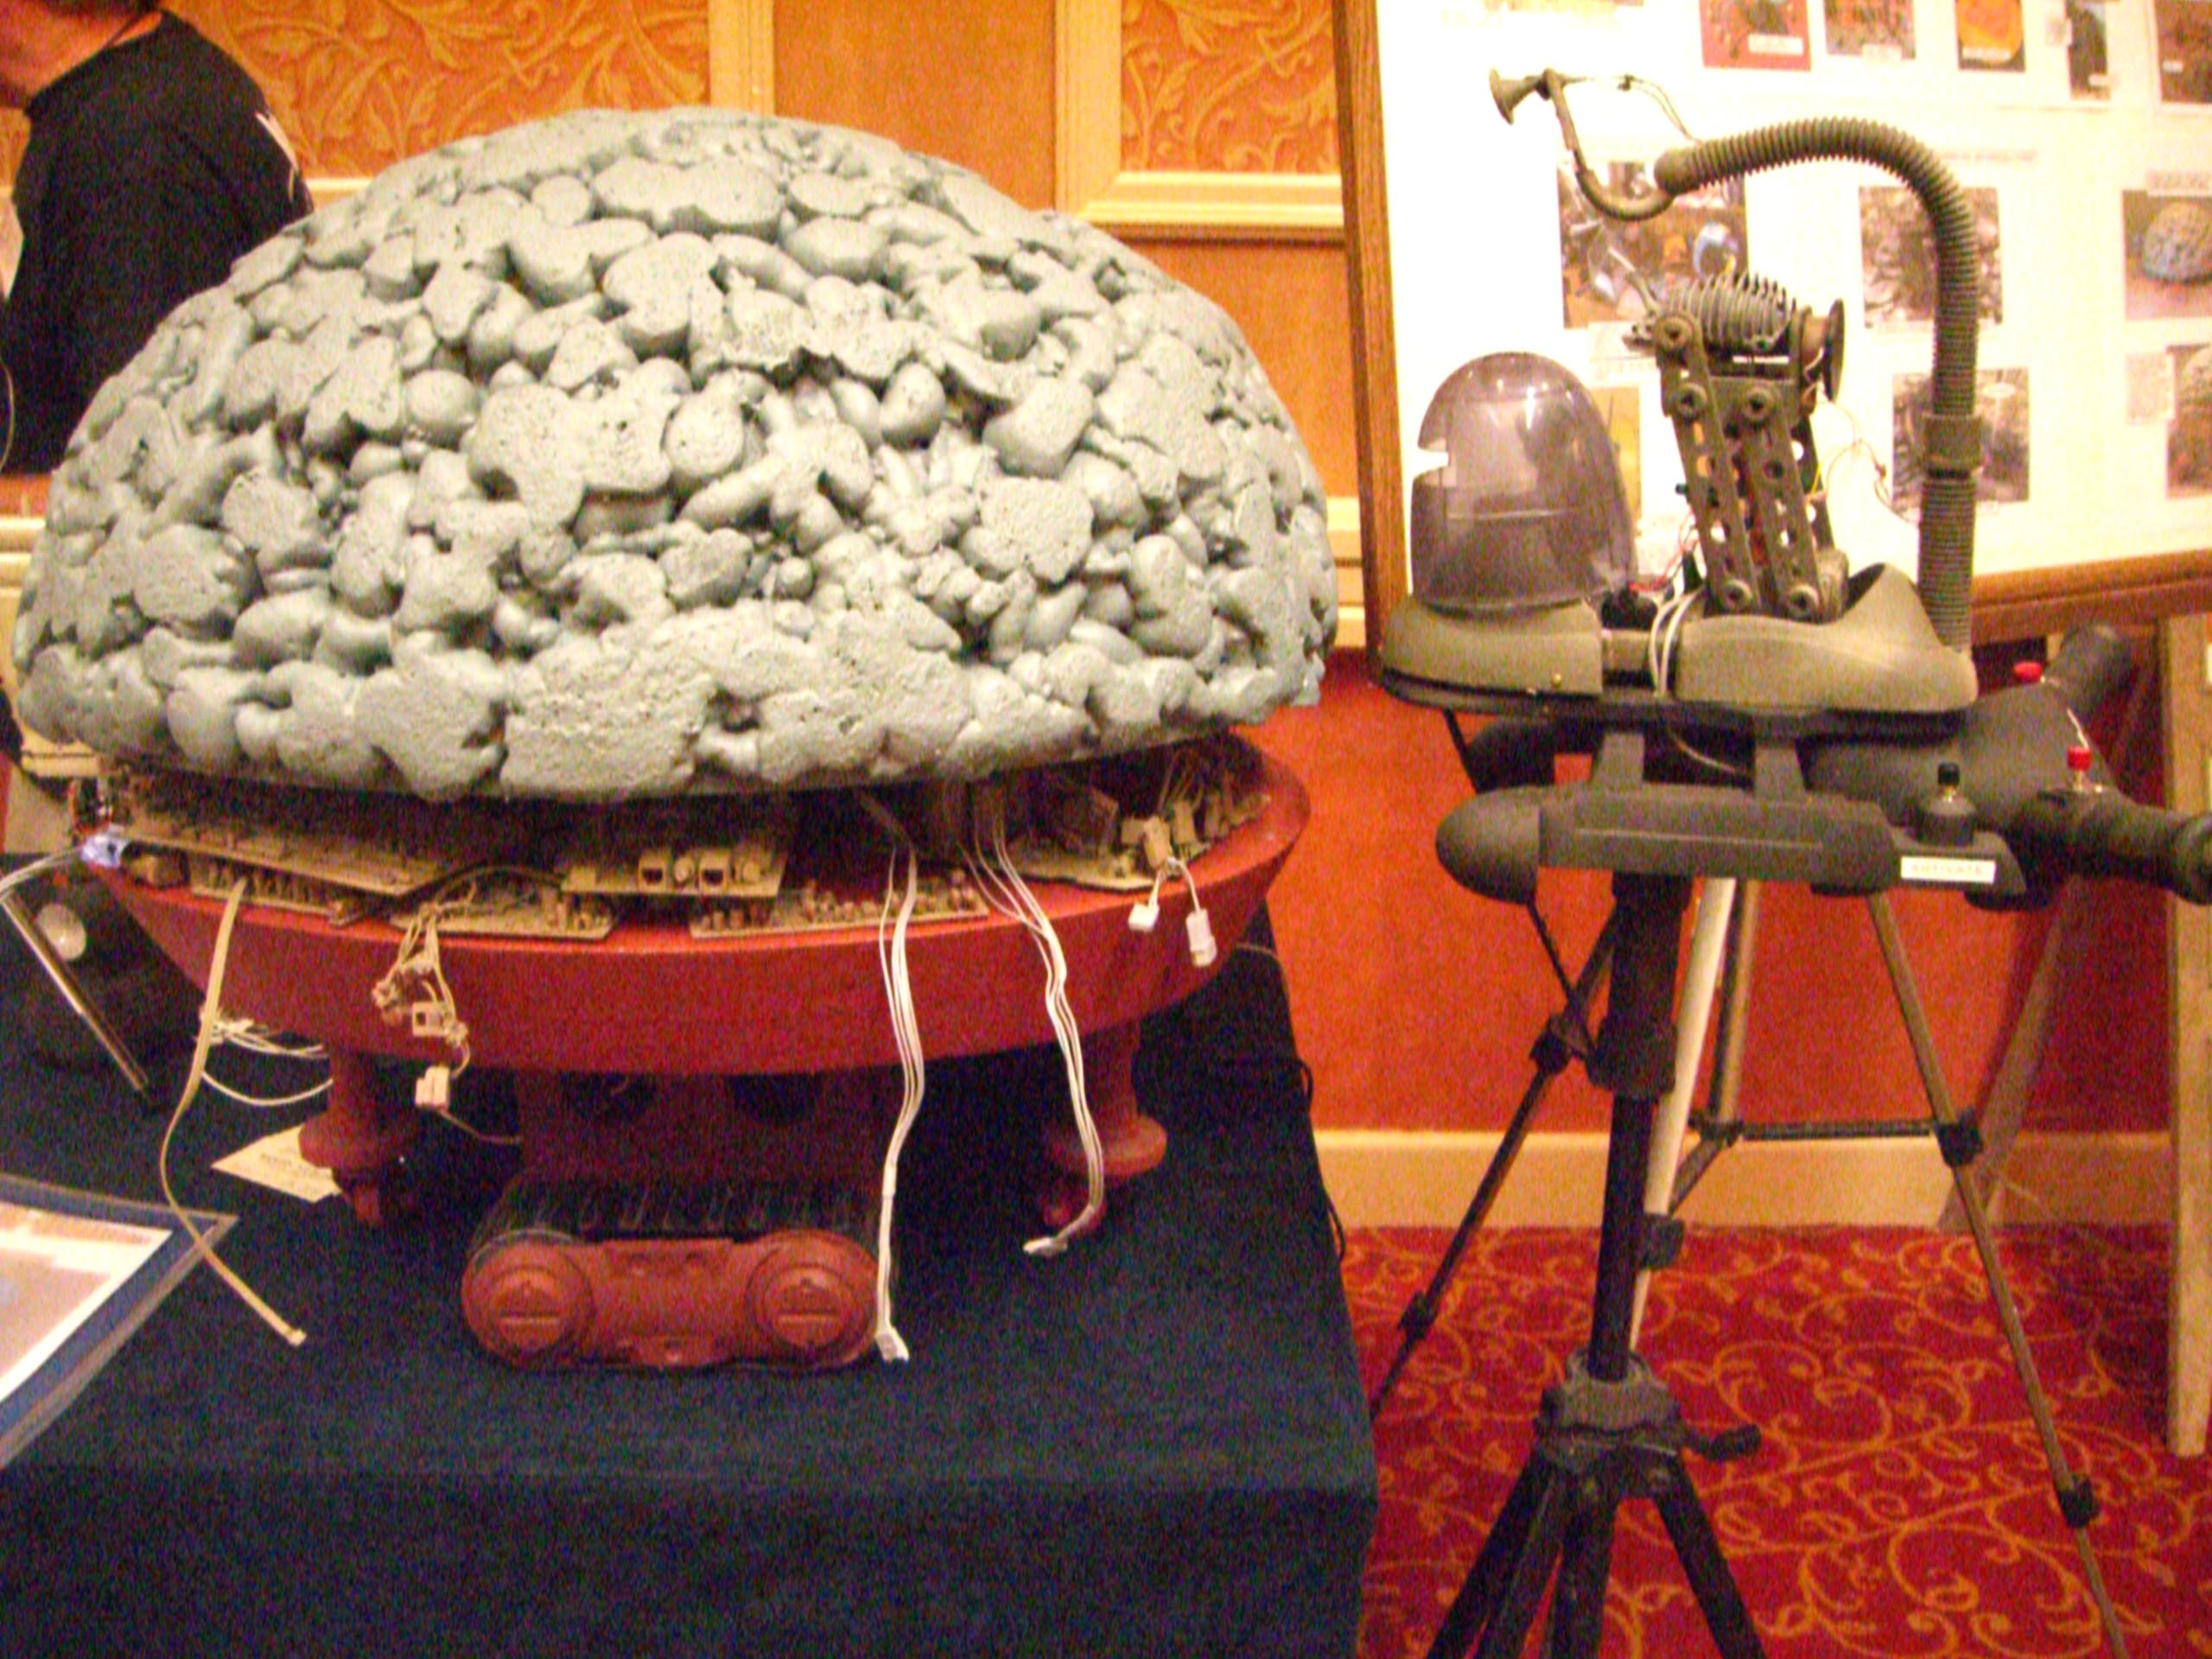 Brain and Compassionator -- robots made by the Robot Group and displayed at the ArmadilloCon 2007